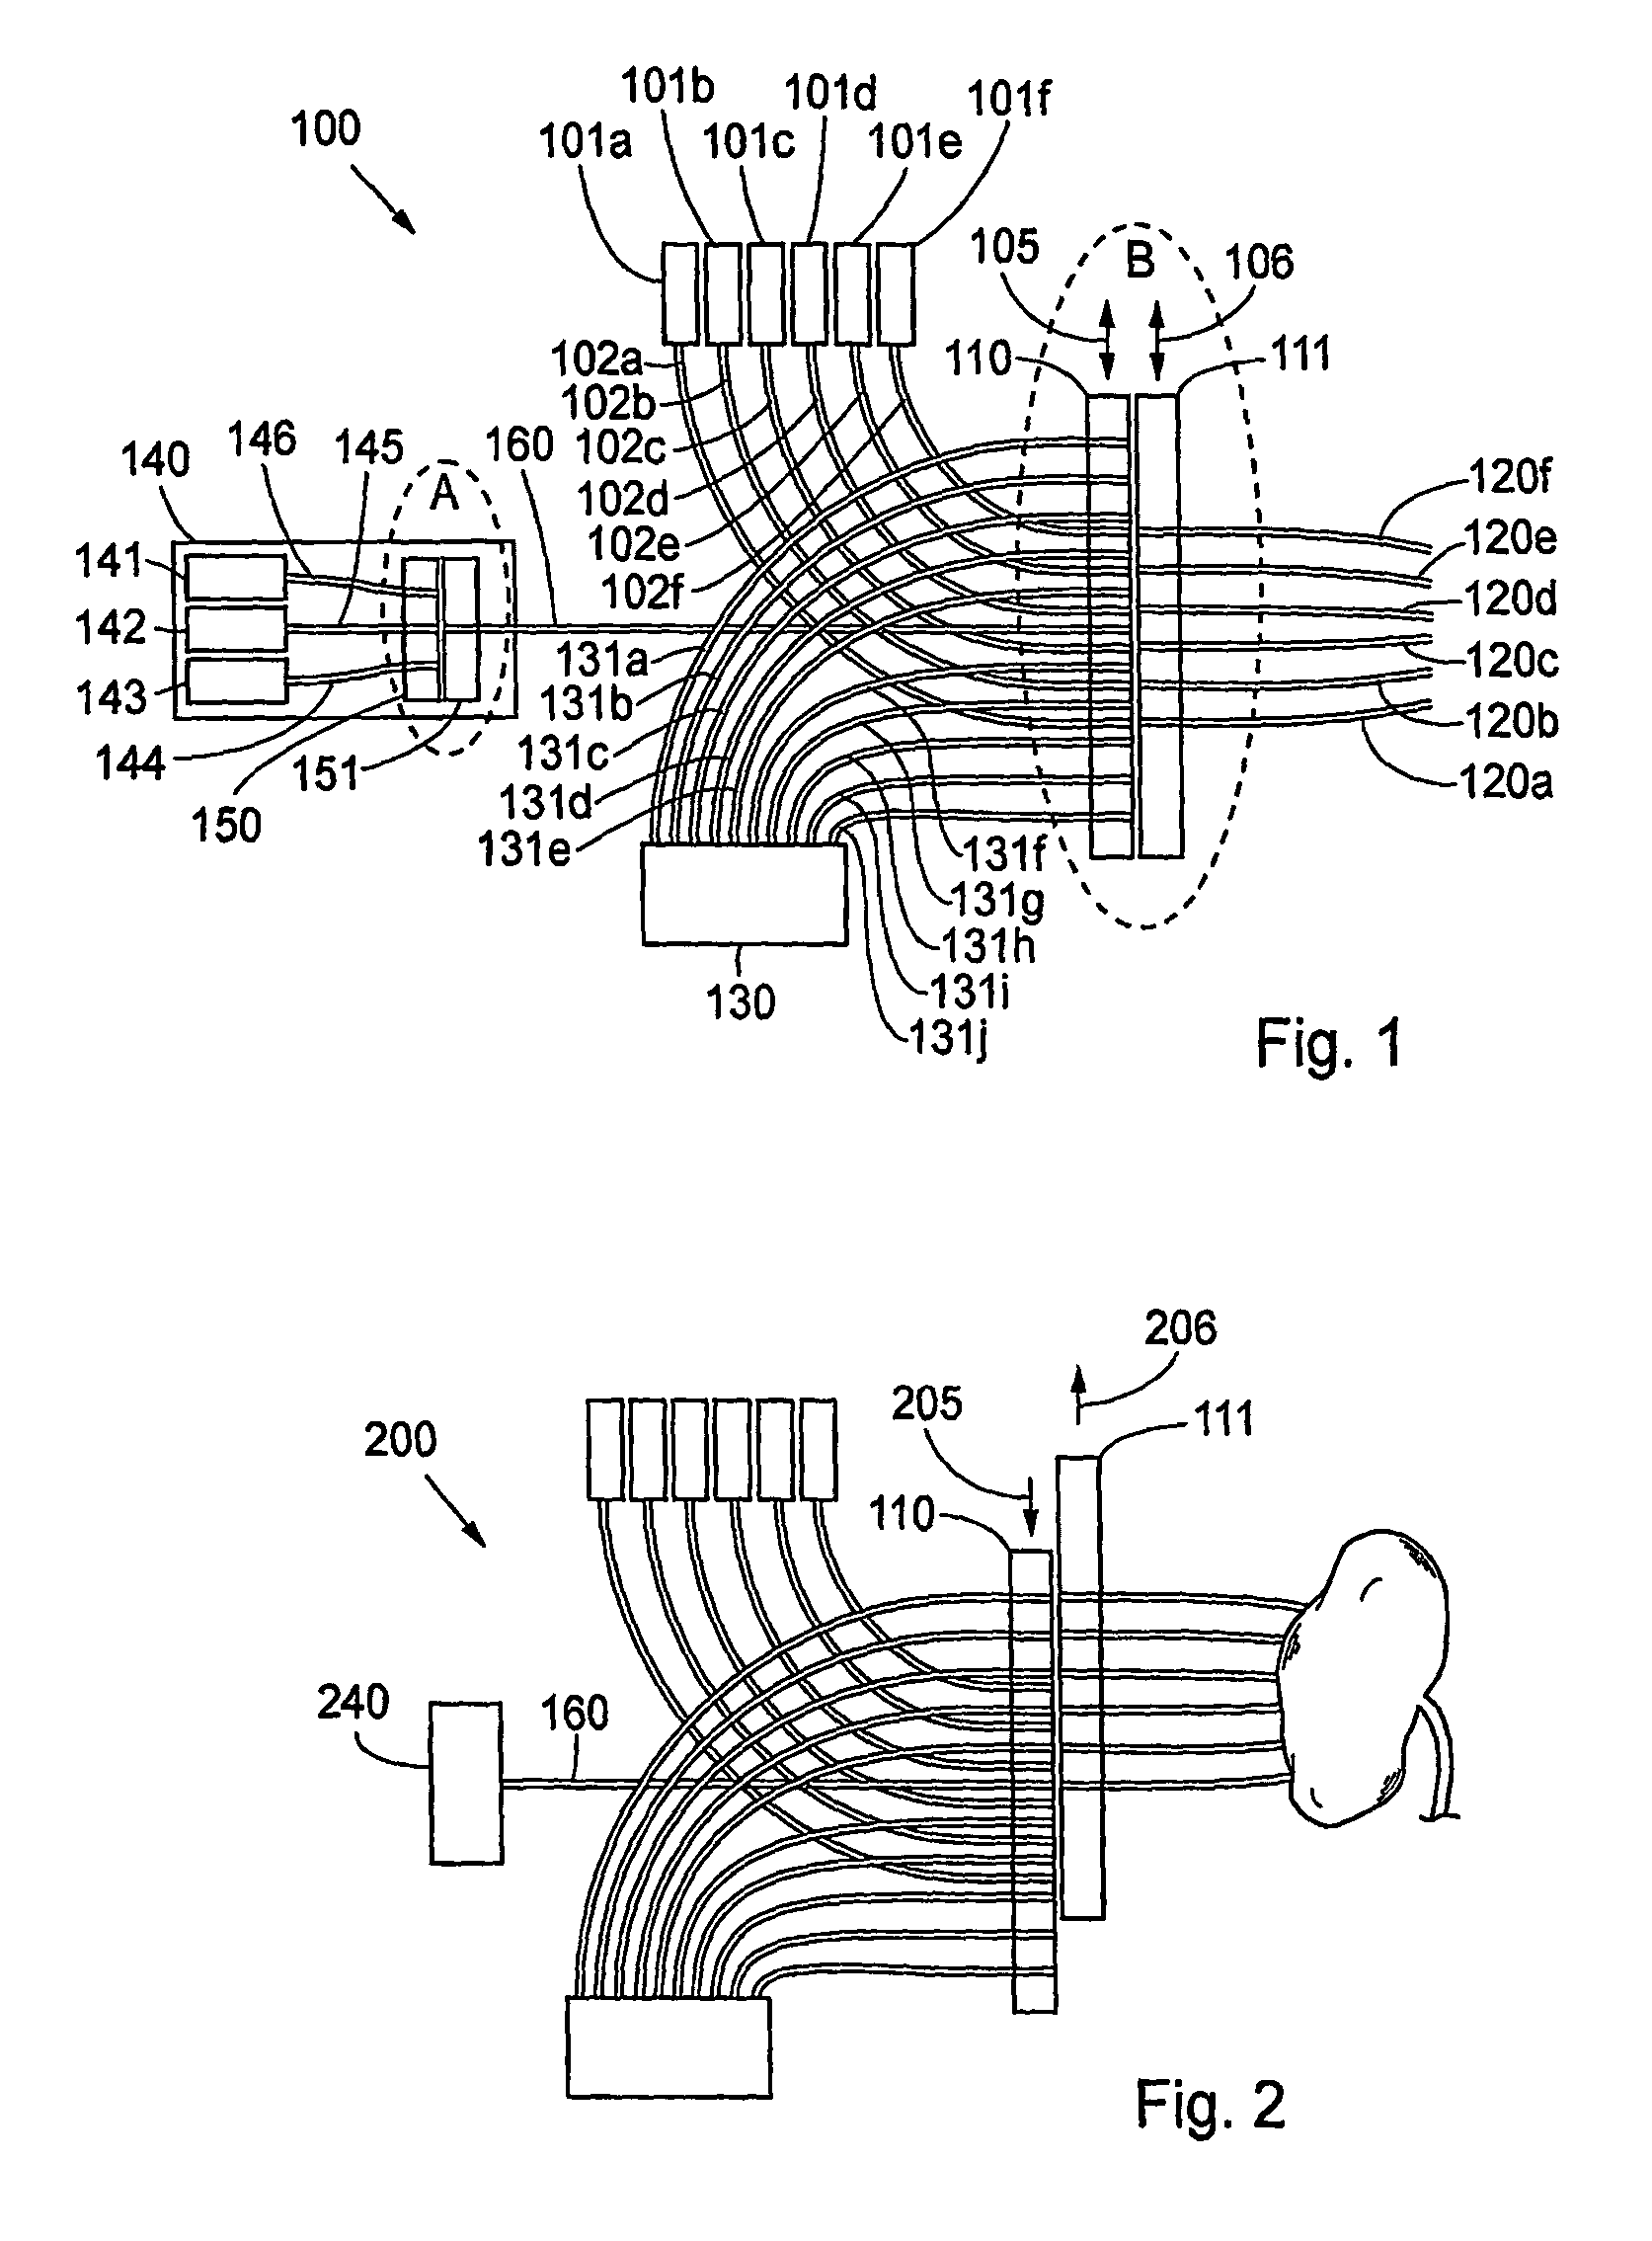 System and method for therapy and diagnosis comprising translatory distributor for distribution of radiation